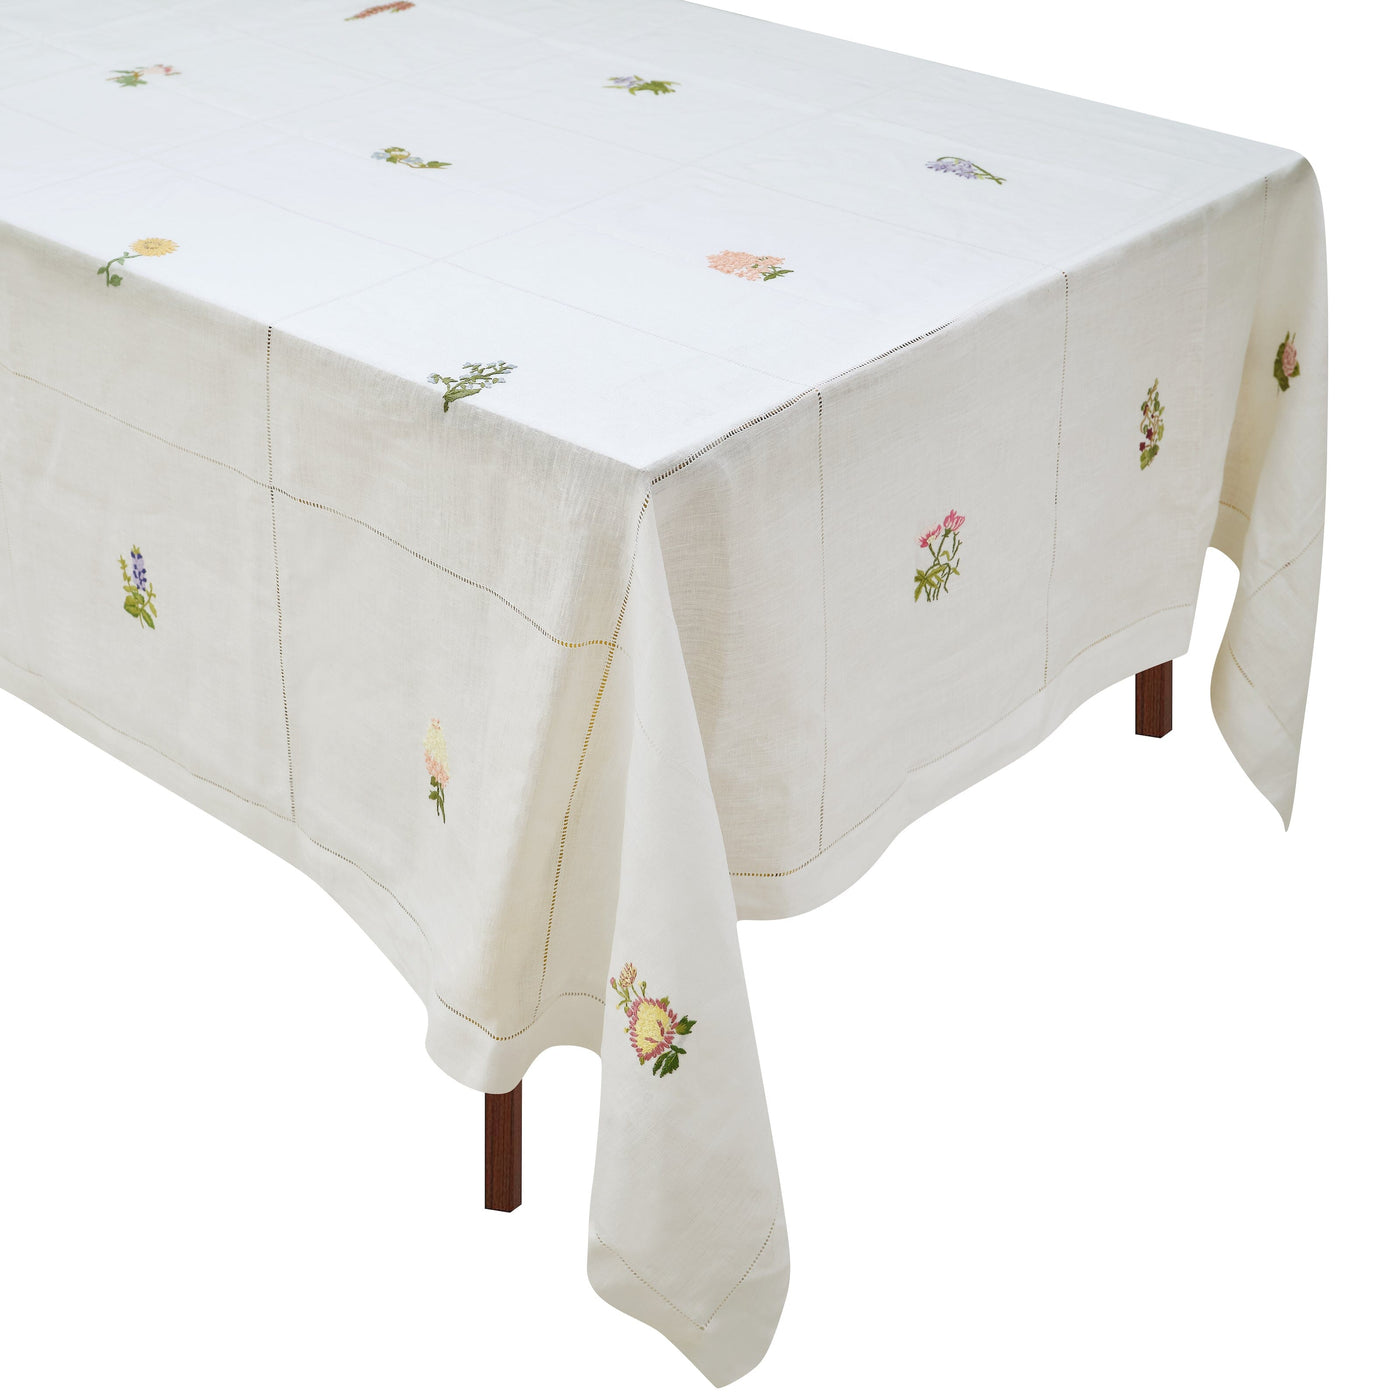 Botanical Flower Tablecloth Spring Botanical Embroidered Table Linens Chefanie 